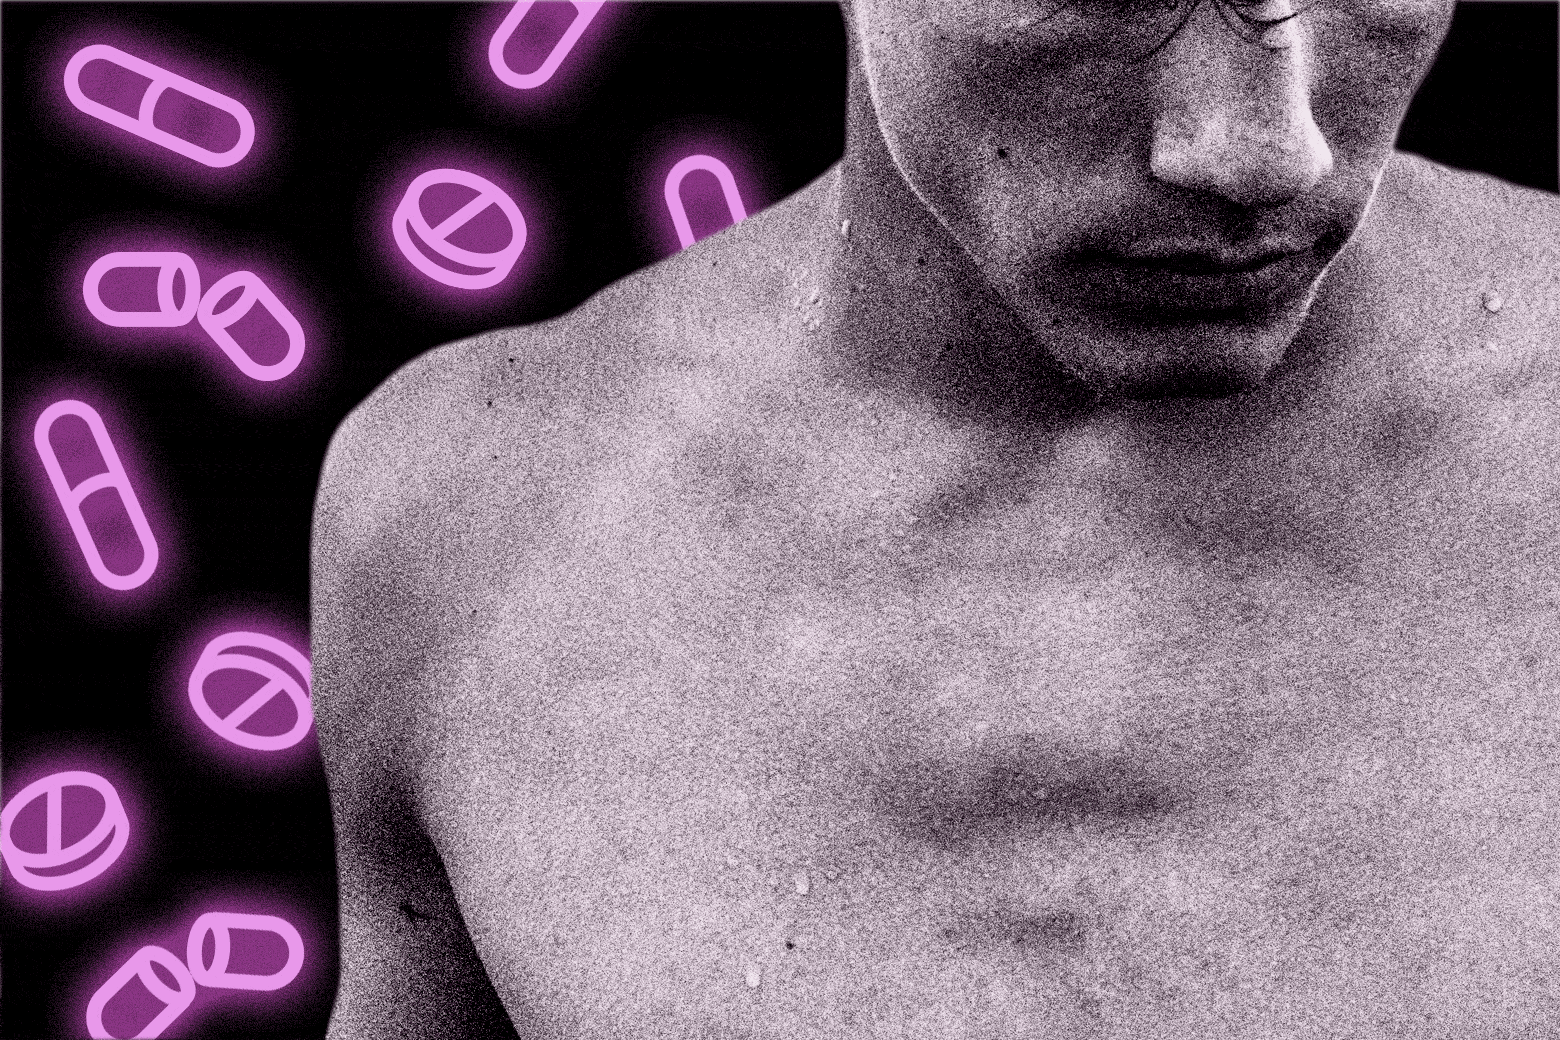 A shirtless man with neon pills in the background.